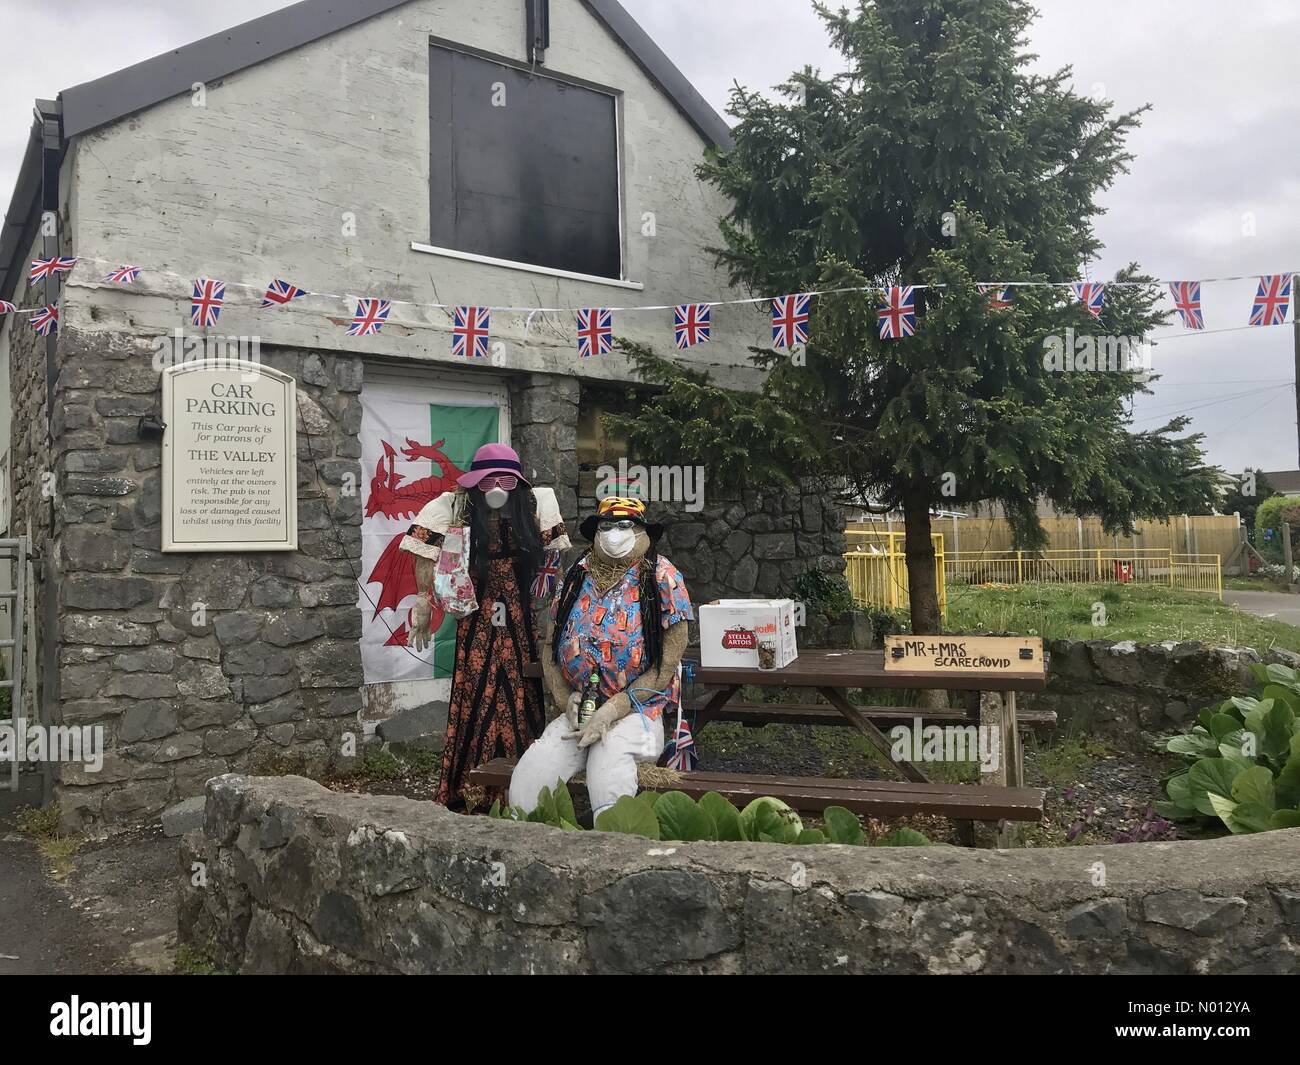 Bishopston, Wales, UK. 10th May, 2020. Scarecrow “Covid19” display outside the Valley Public House in the Bishopston district of Swansea this afternoon. Credit: Phil Rees/StockimoNews/Alamy Live News Stock Photo